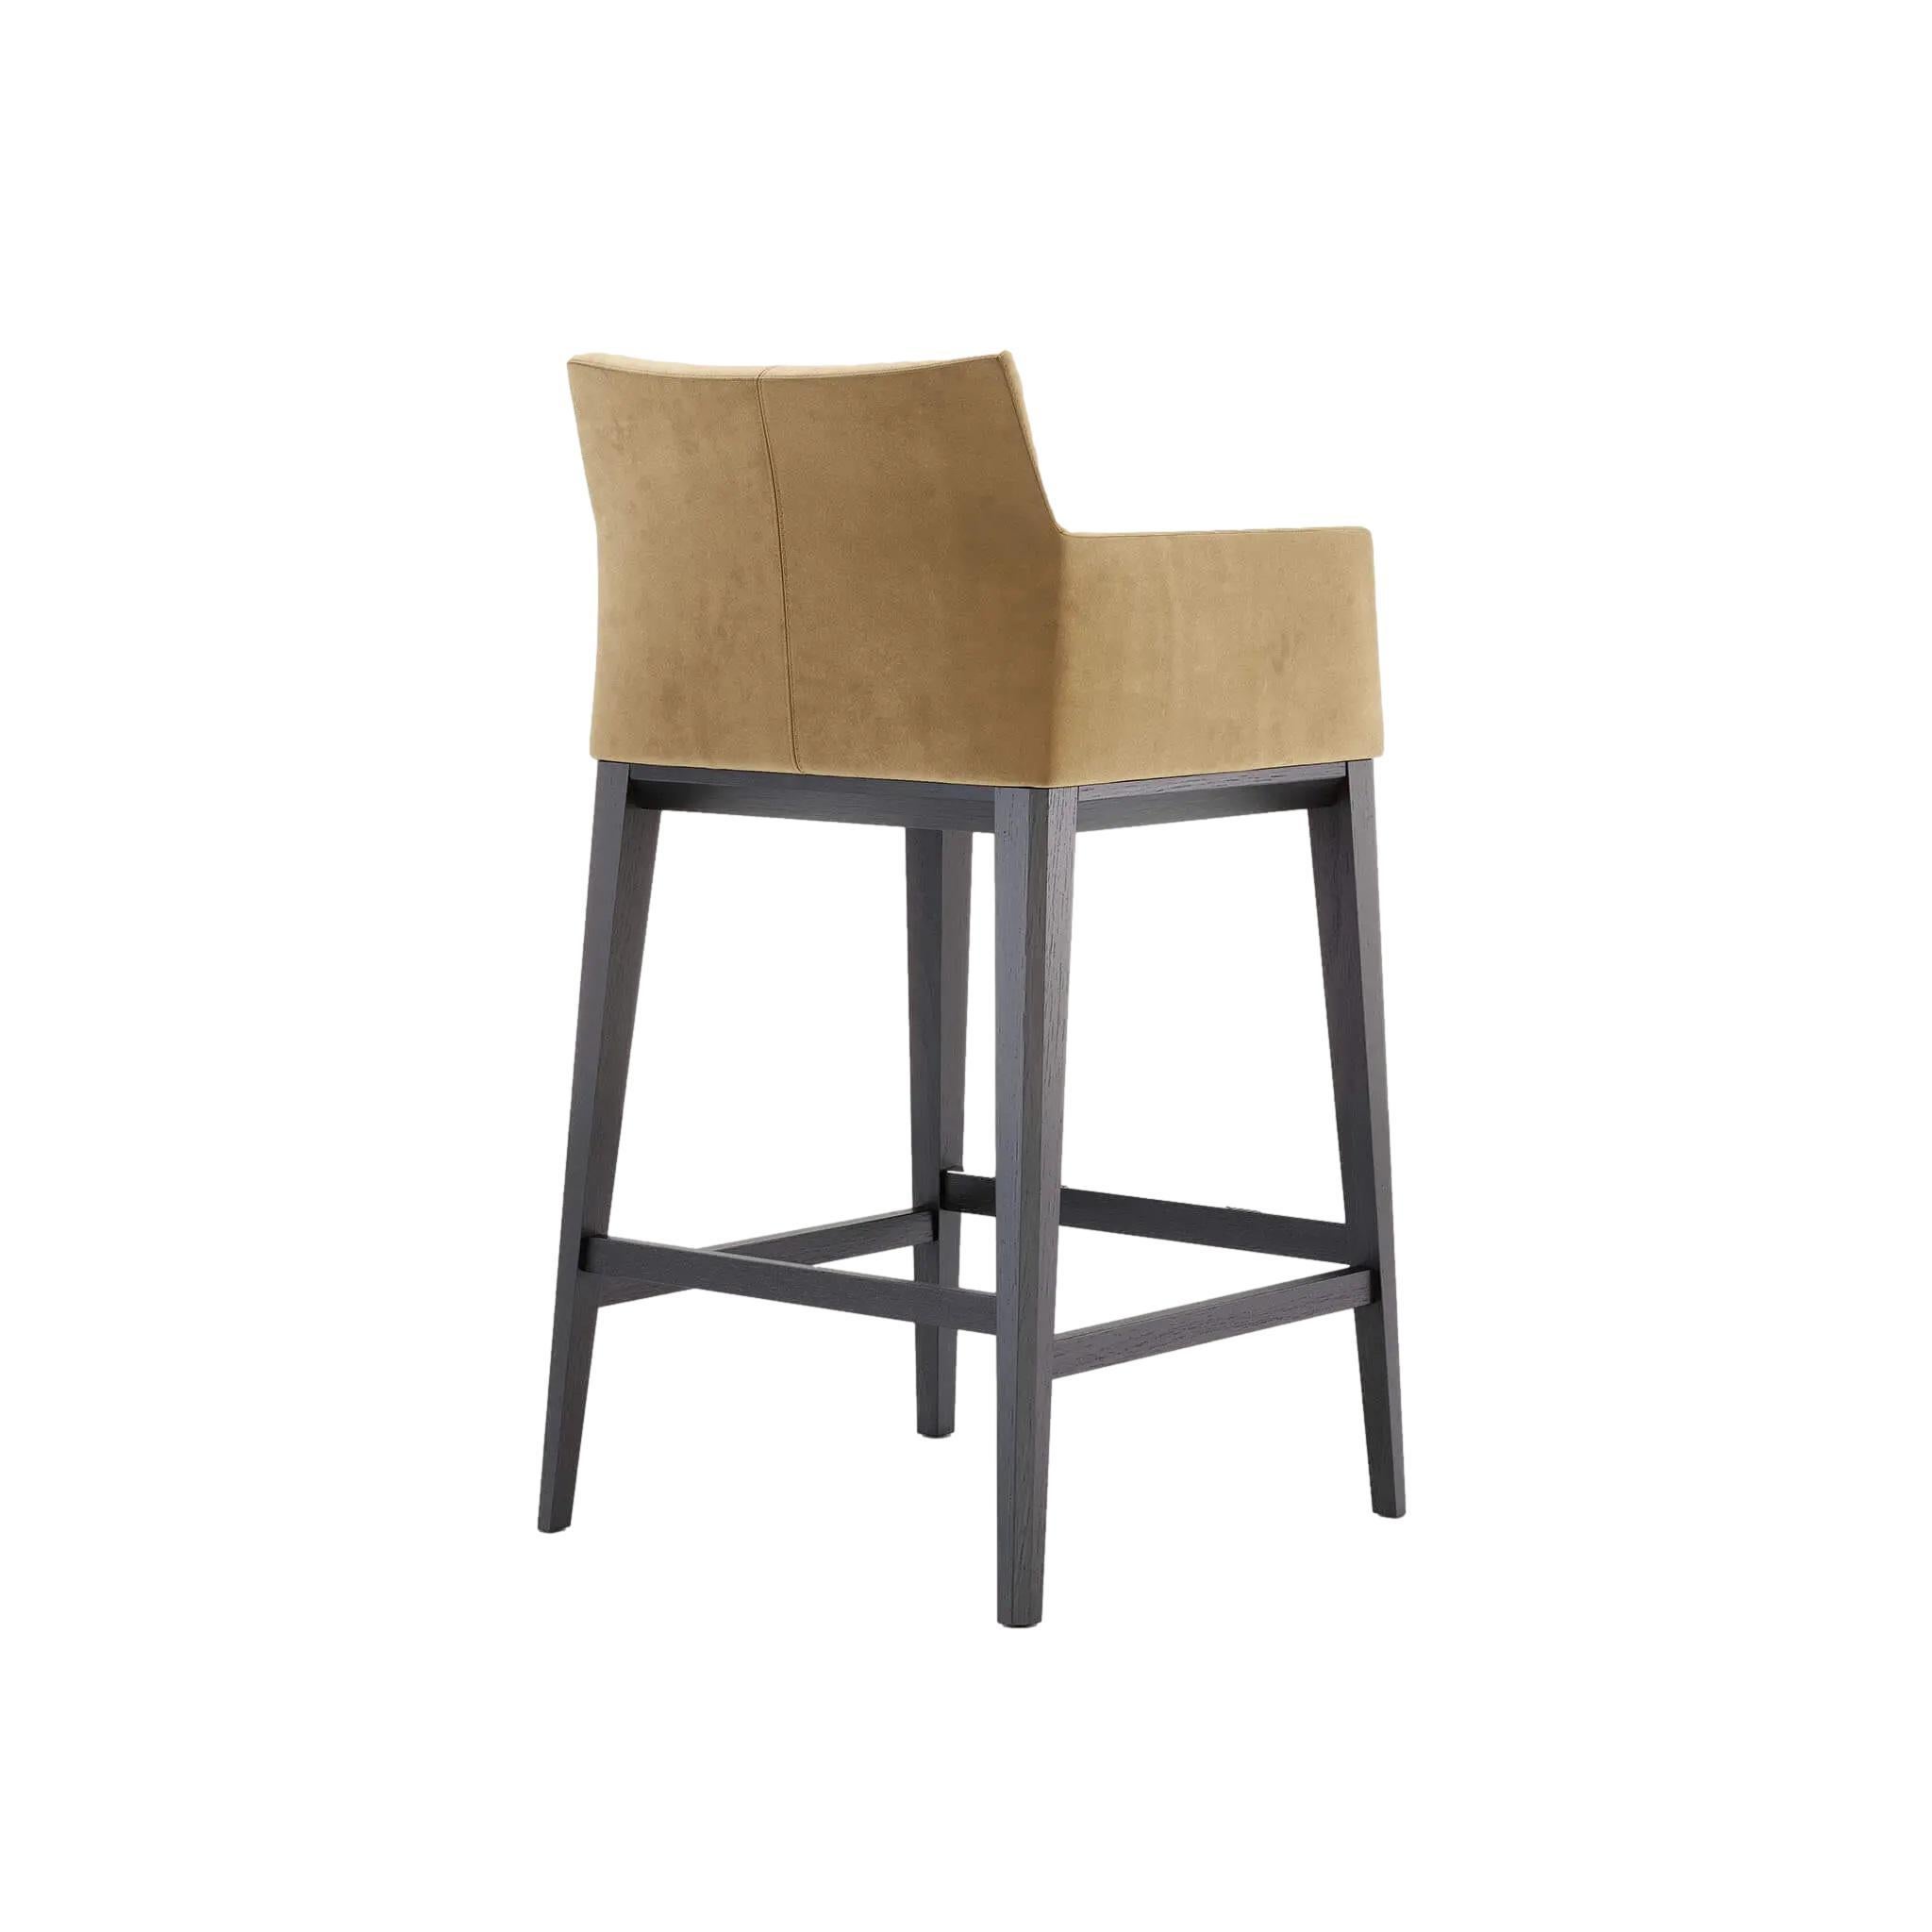 Modern Upholstered Stool Offered in Solid Wood Structure